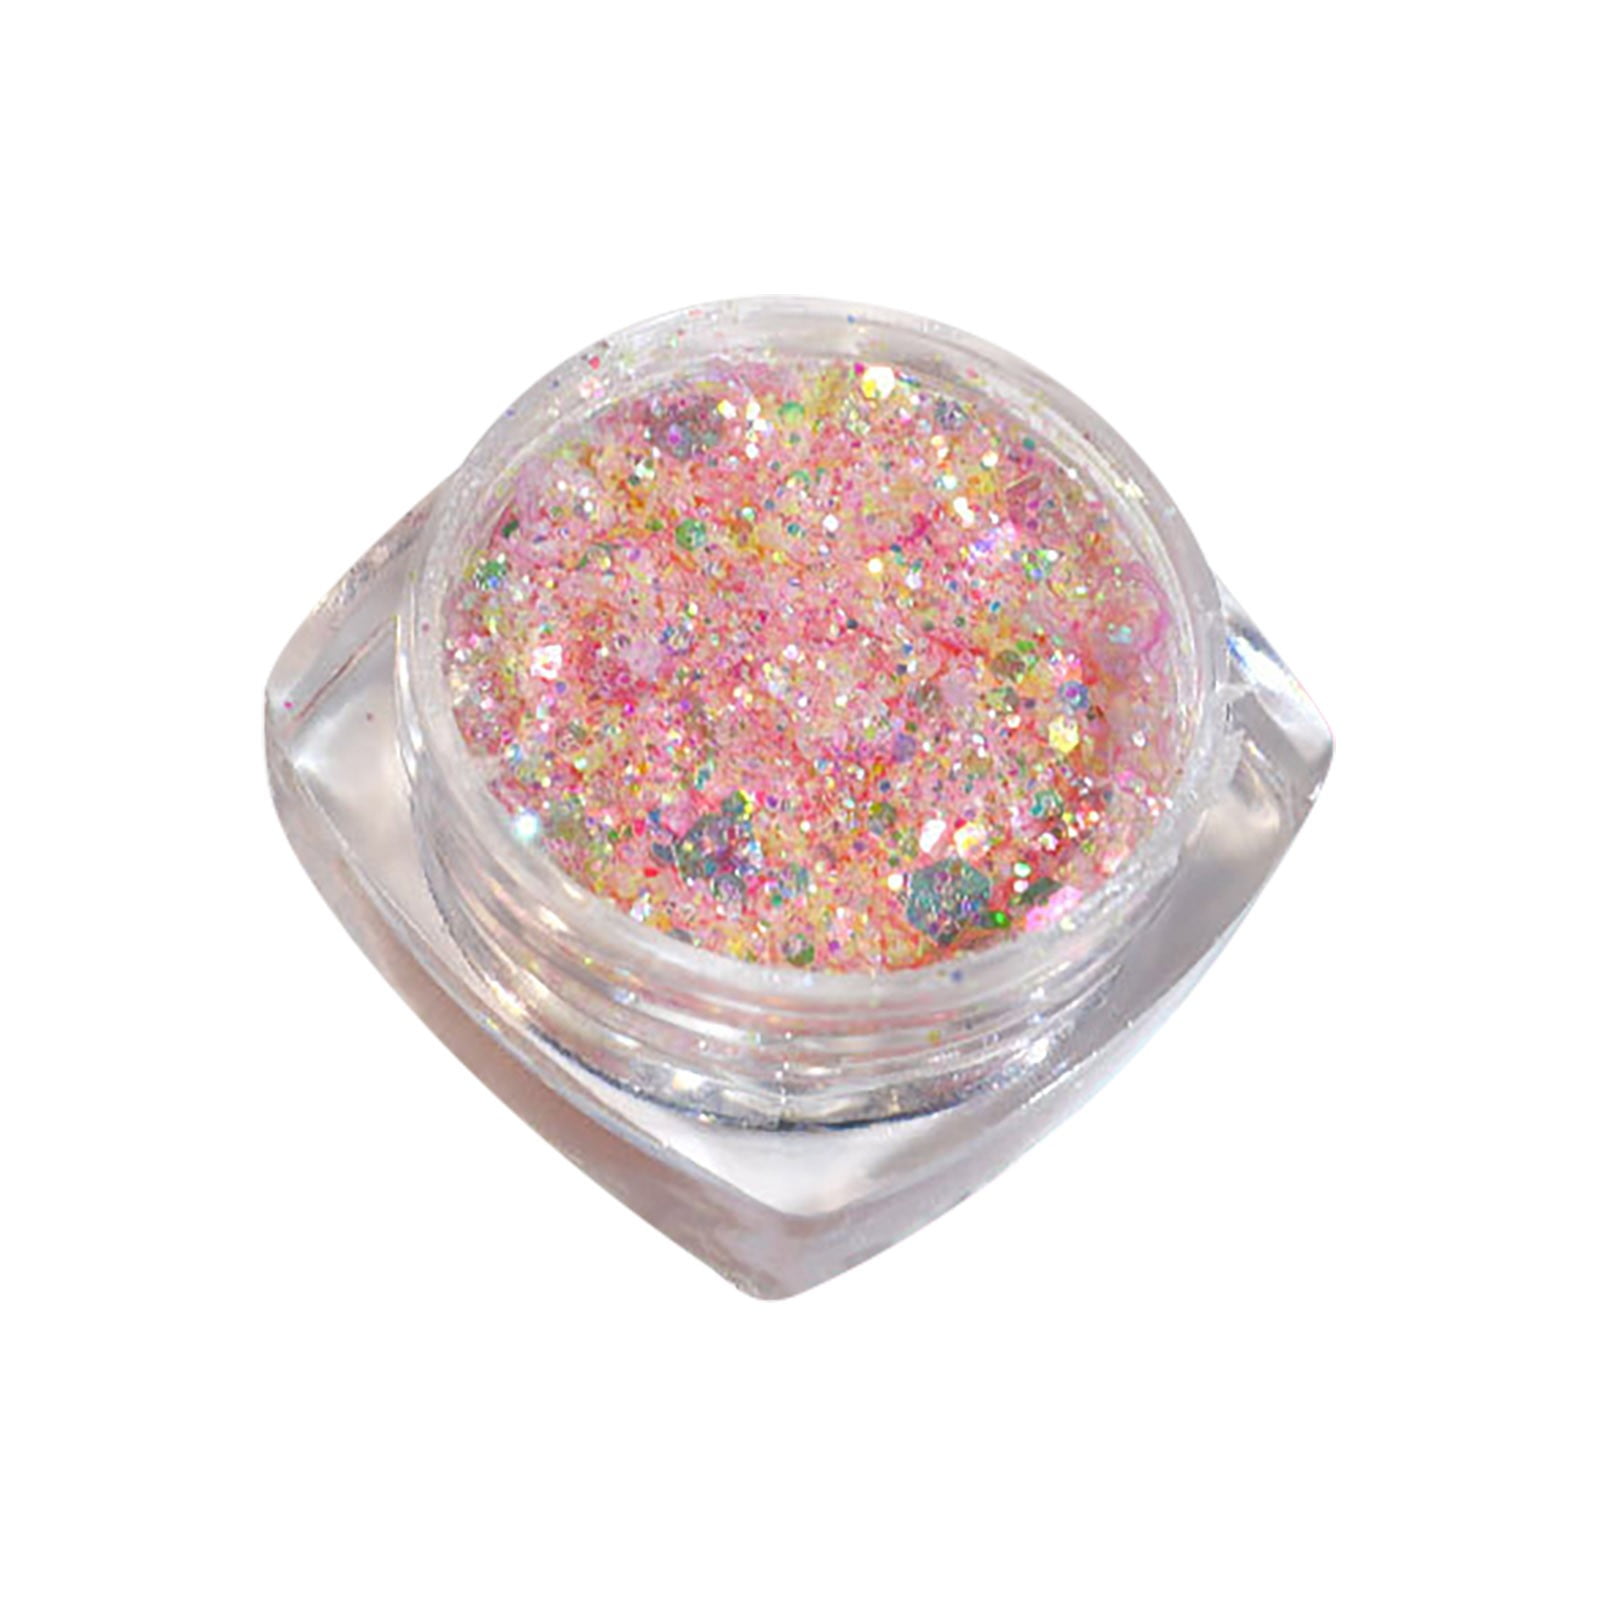 ELF Face Gems Stick on, Face Jewels Stickers Self-Adhesive Face Diamonds  Rhinestones for Arm Body Nail Decoration Party 